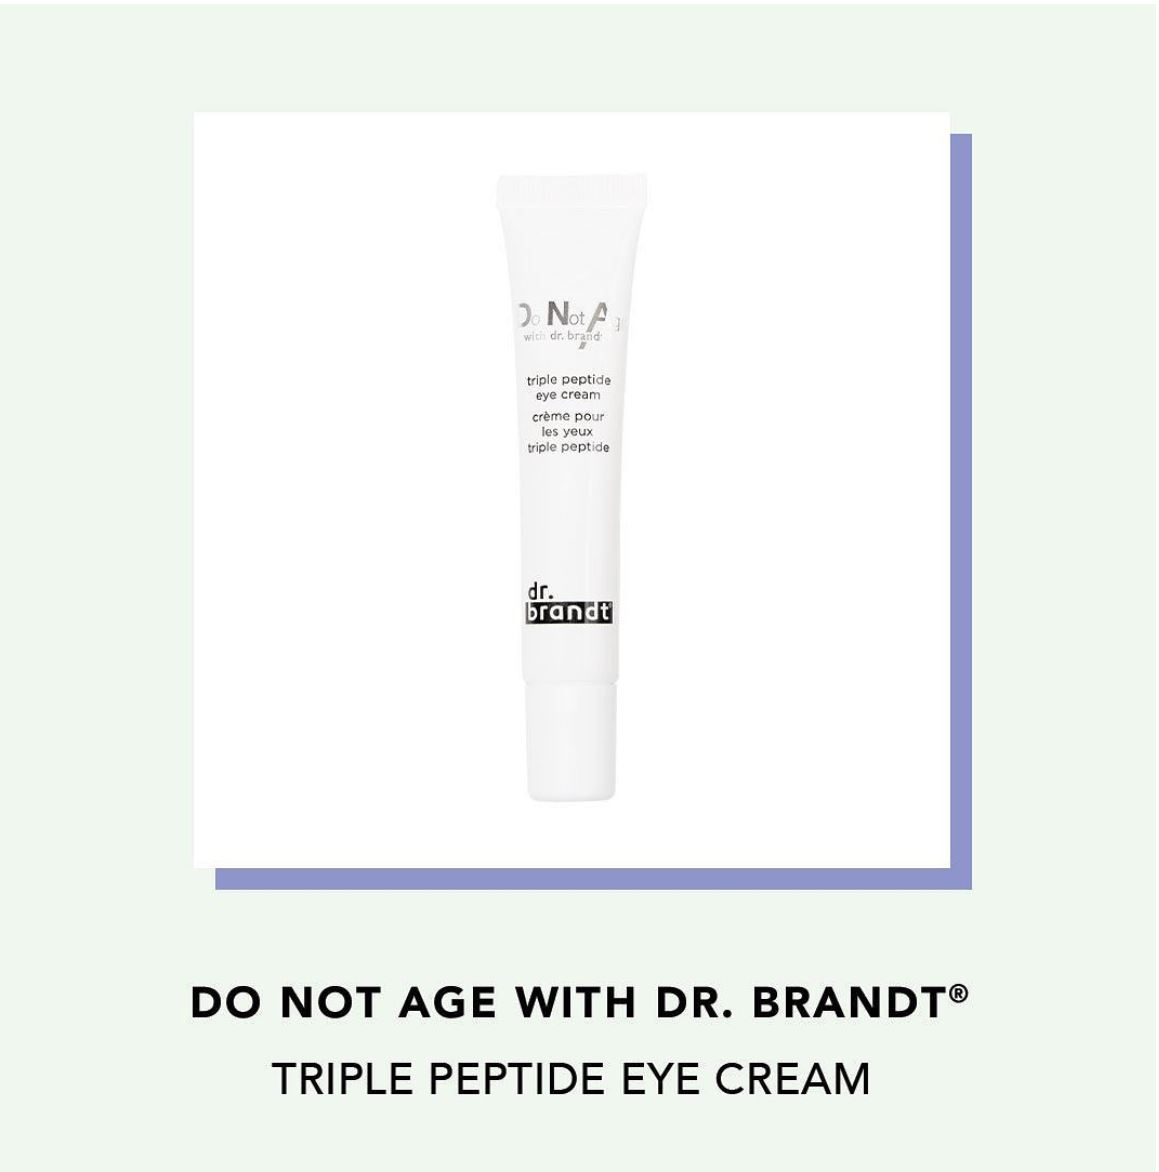 DO NOT AGE WITH DR. BRANDT Triple Peptide Eye Cream